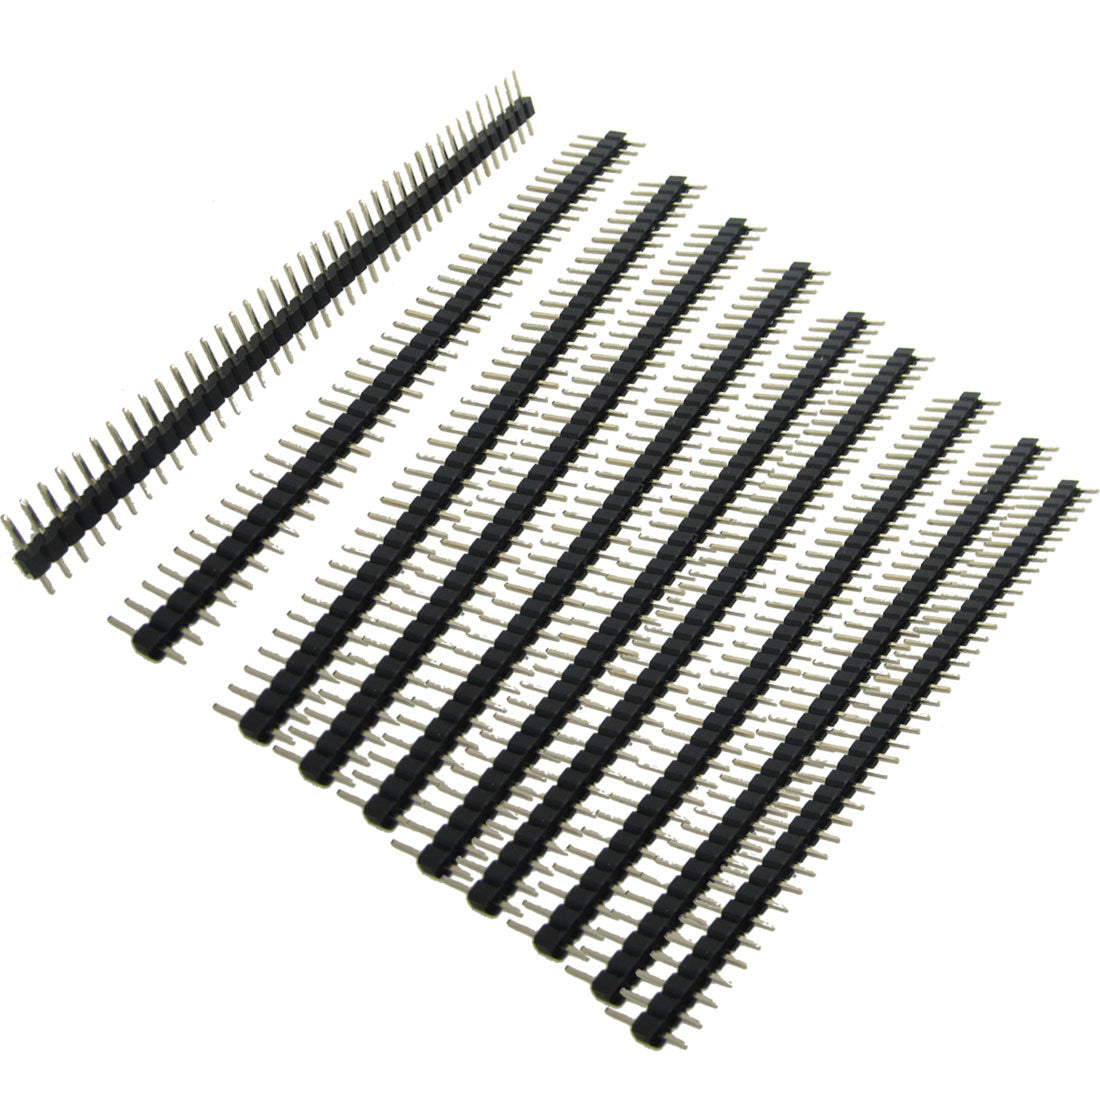 uxcell Uxcell 10 Pcs 1x40 Pin 2.0mm Pitch Single Row PCB Pin Headers